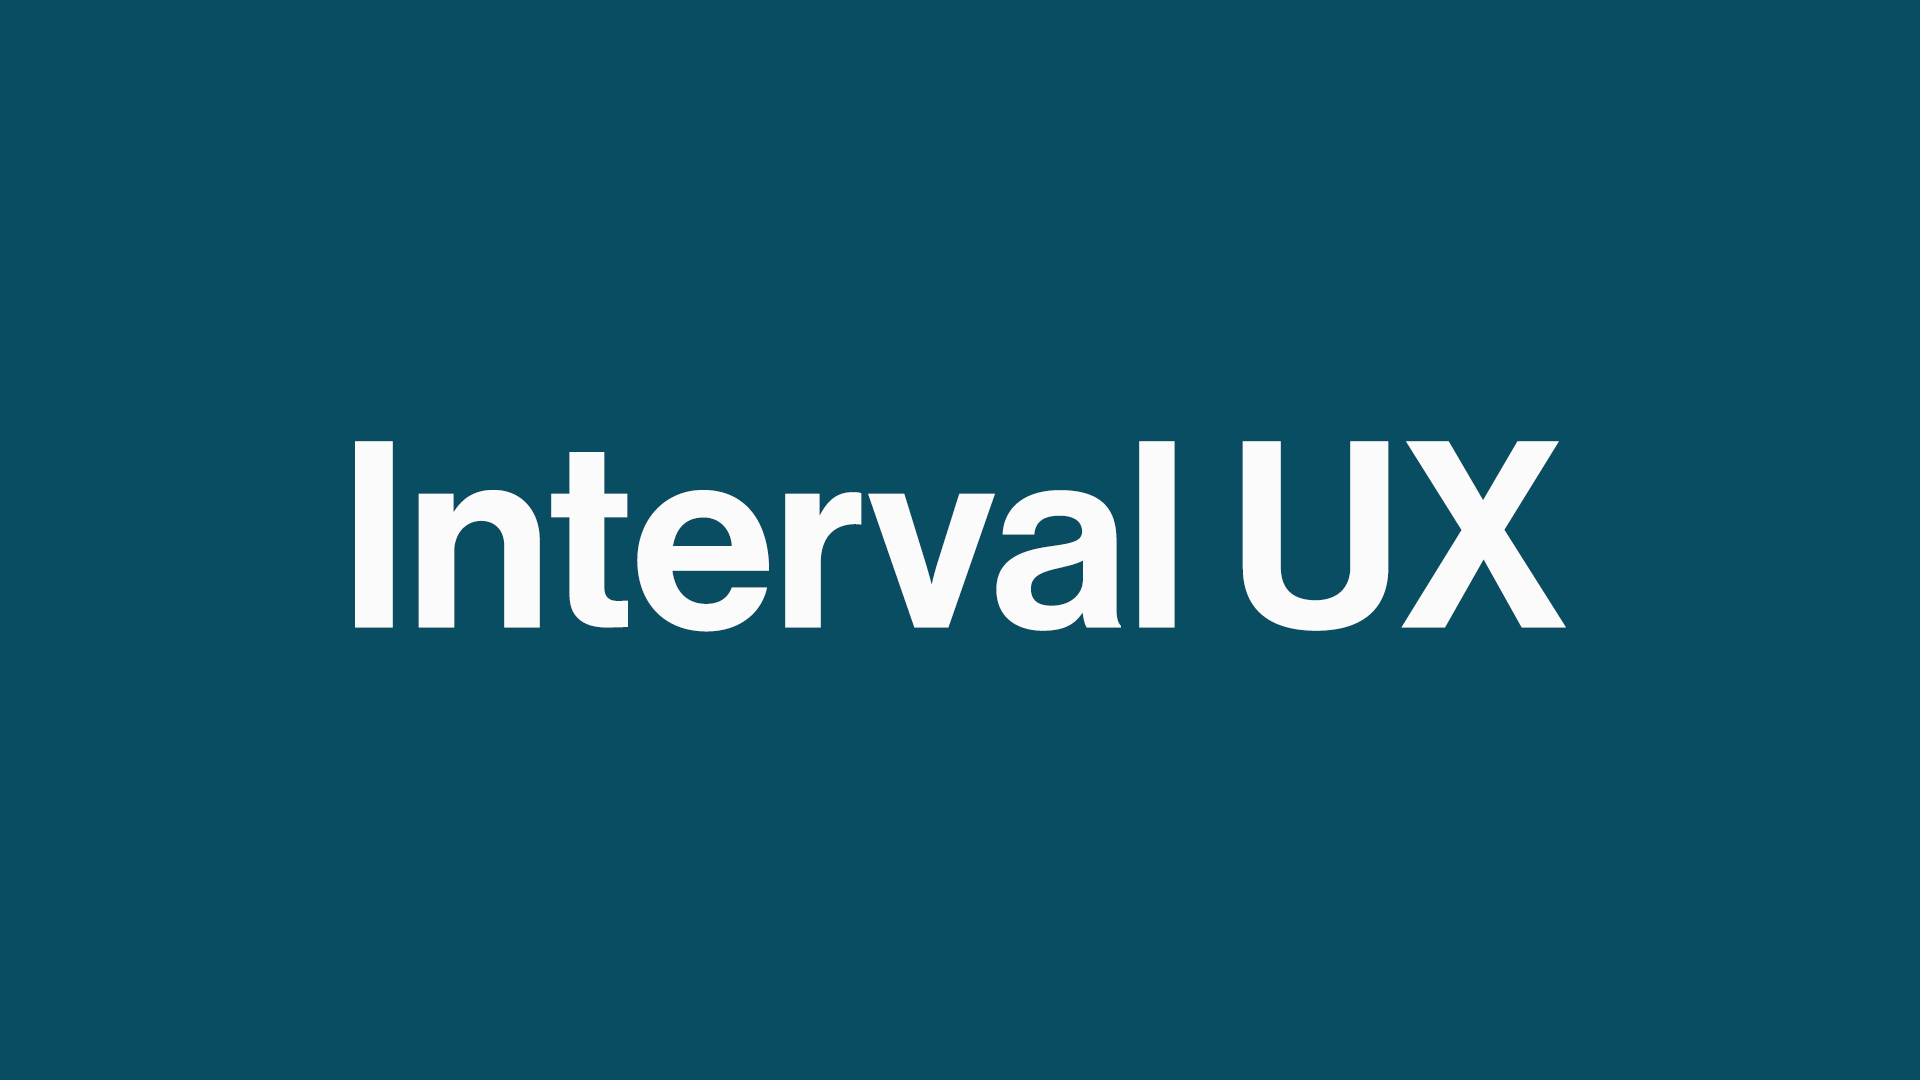 check the post:Interval UX: Applying Agile Principles to UX in a Continuous, Integrated Way for a description of the image 